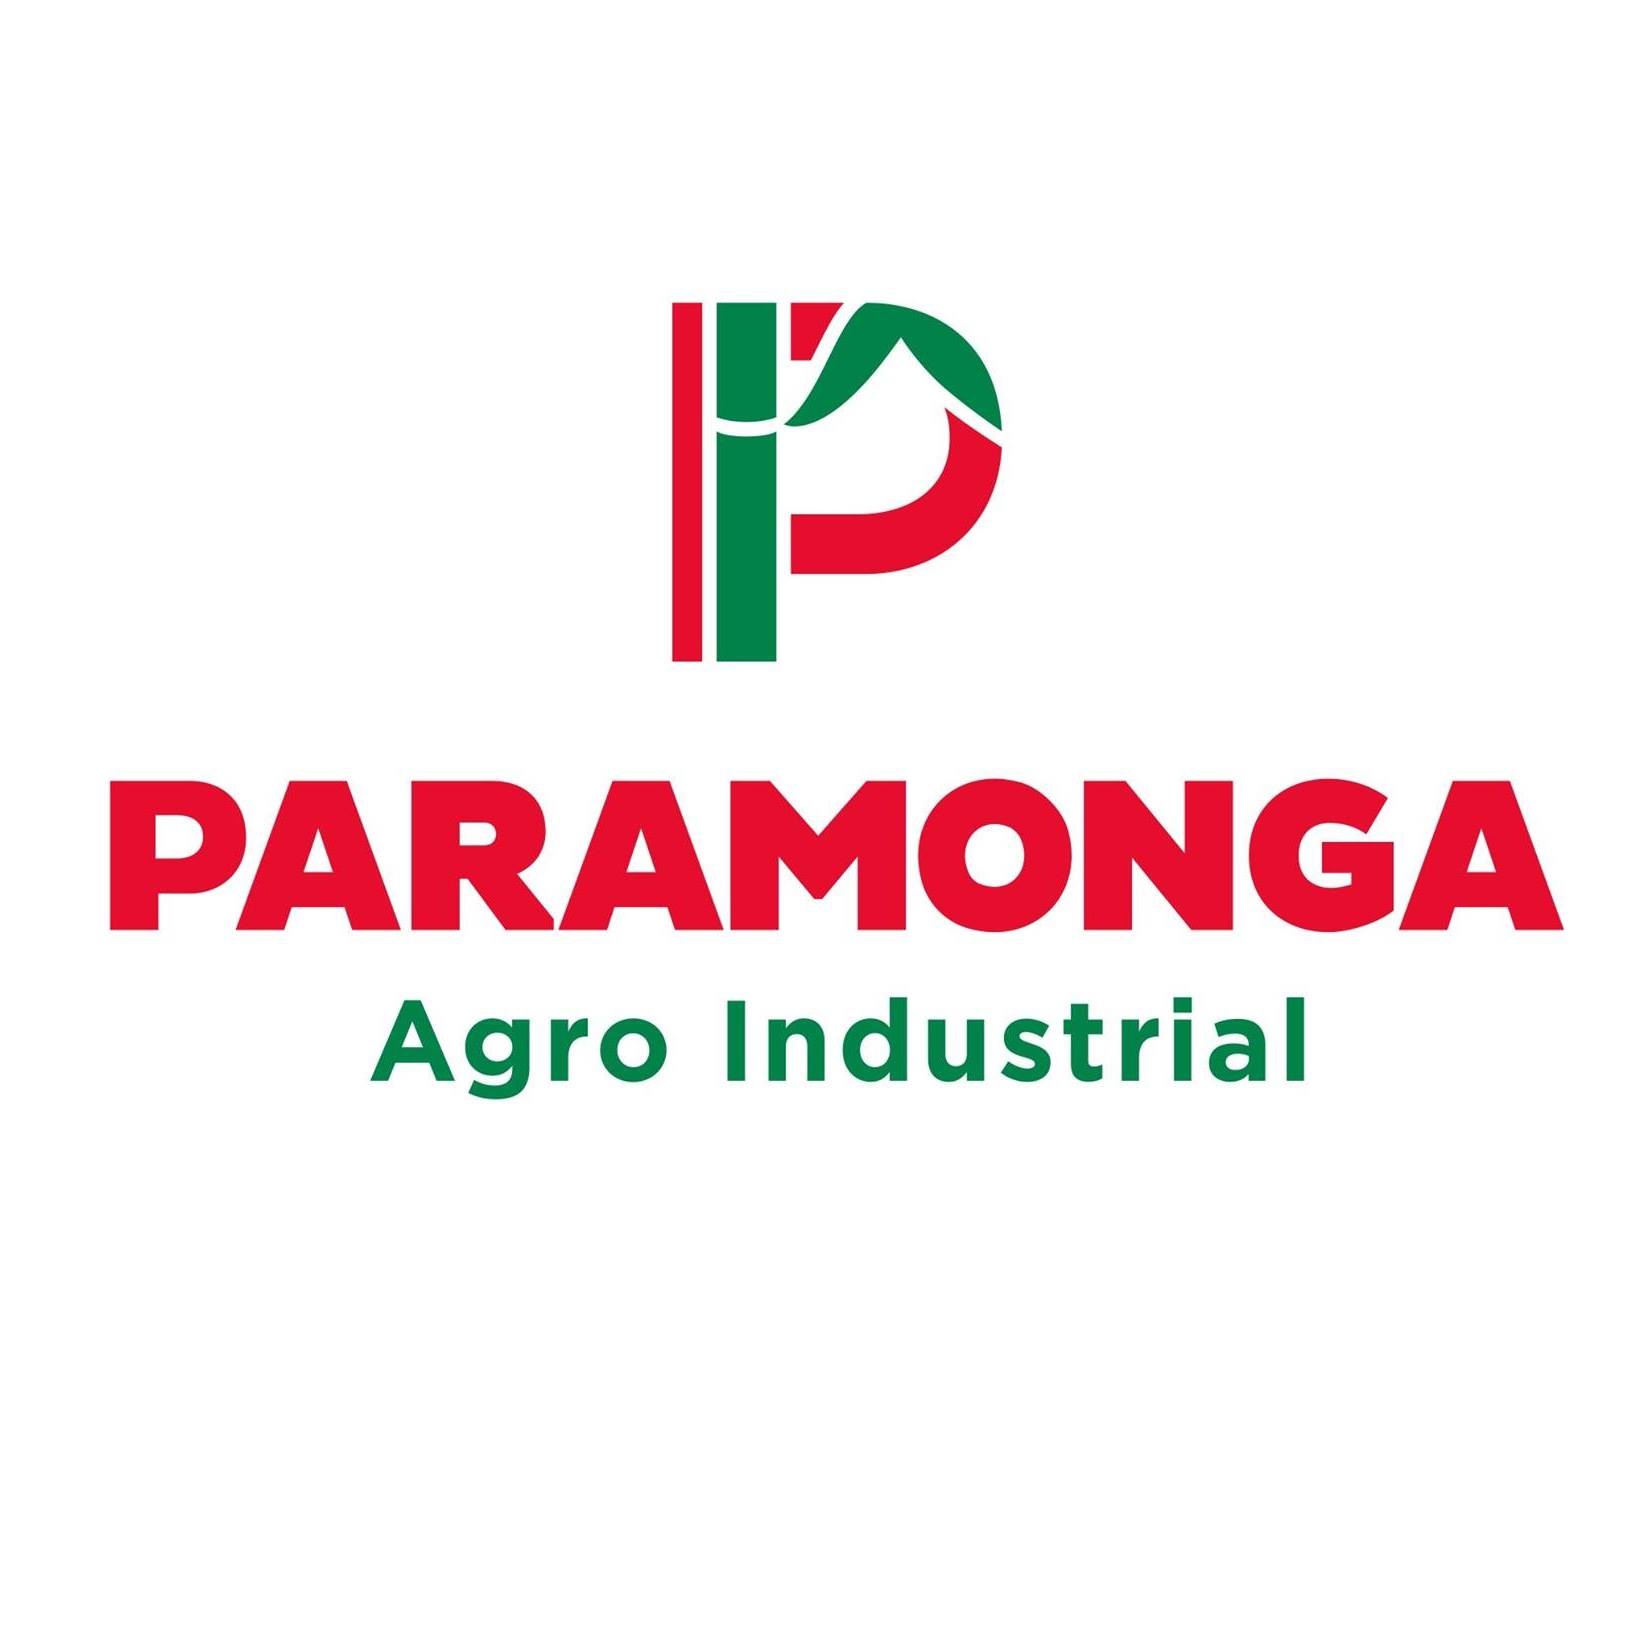 Agro Industrial Paramonga S.A.A.